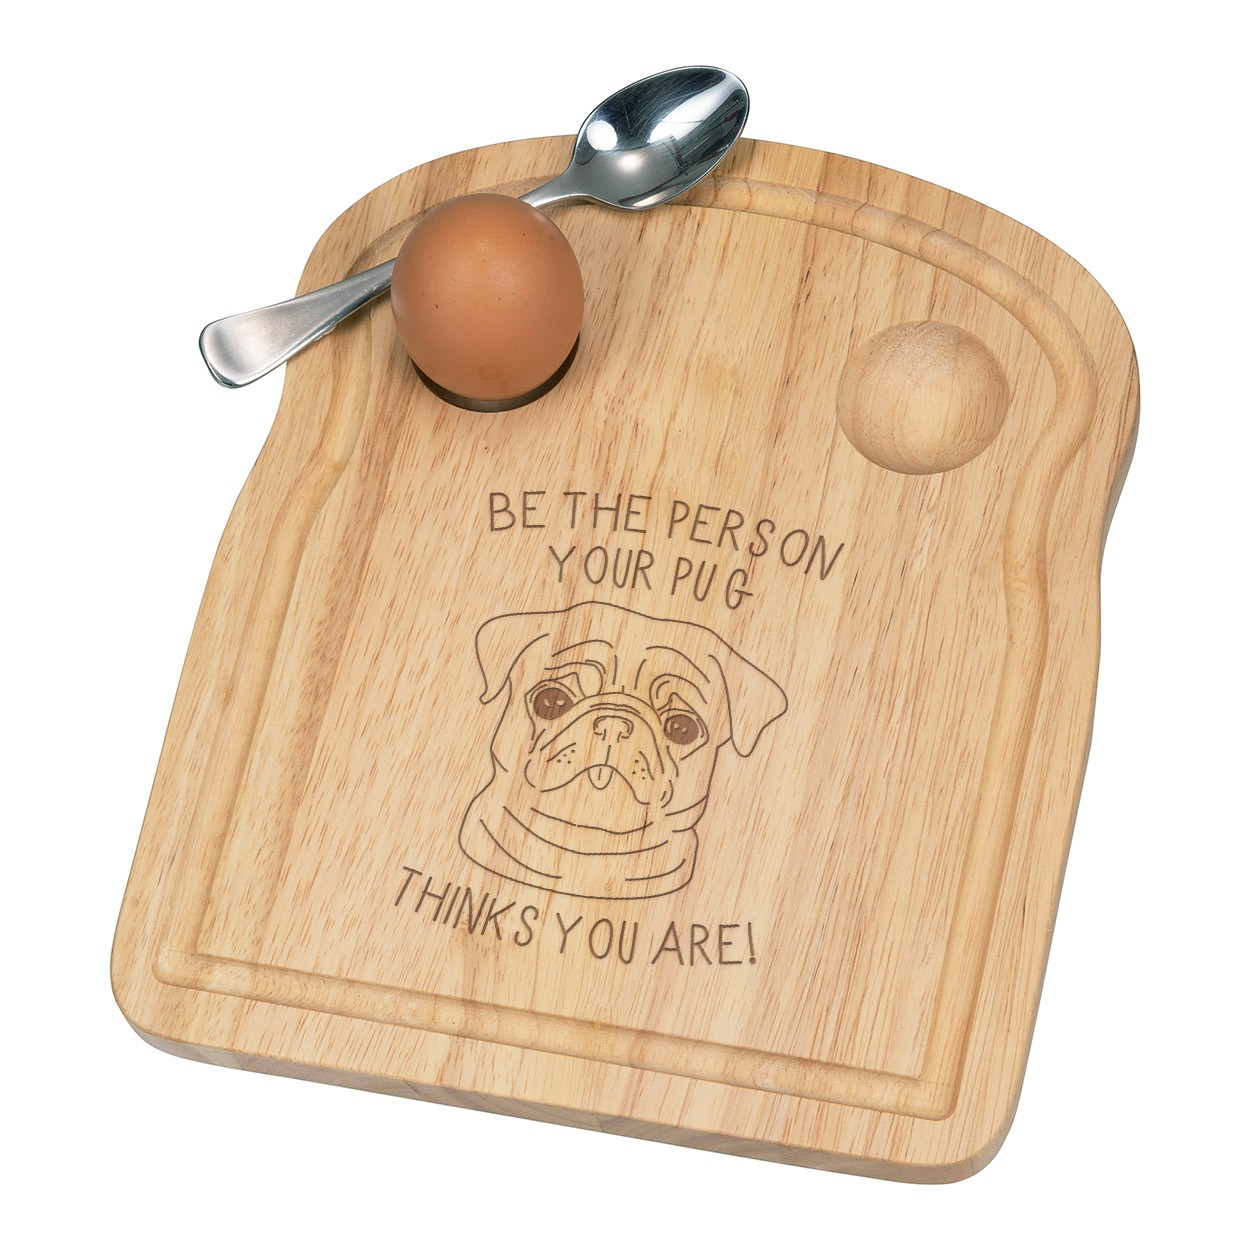 Be The Person Your Pug Thinks You Are Breakfast Dippy Egg Cup Board Wooden